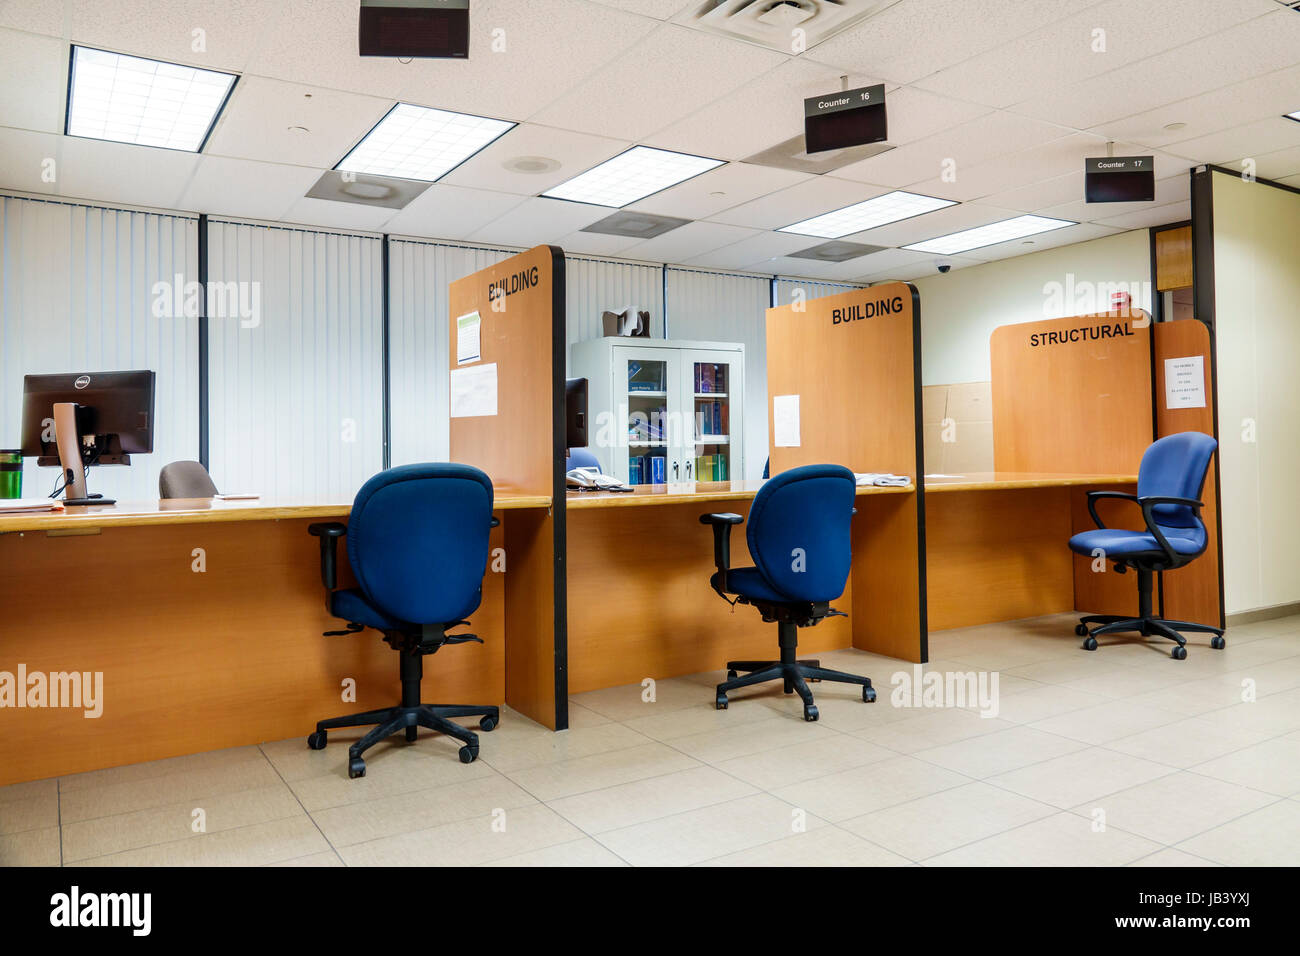 Miami Beach Florida,City of,Miami Beach,City Hall,building Department,contractor permits,building,structural,empty office pods,chairs,FL170401060 Stock Photo